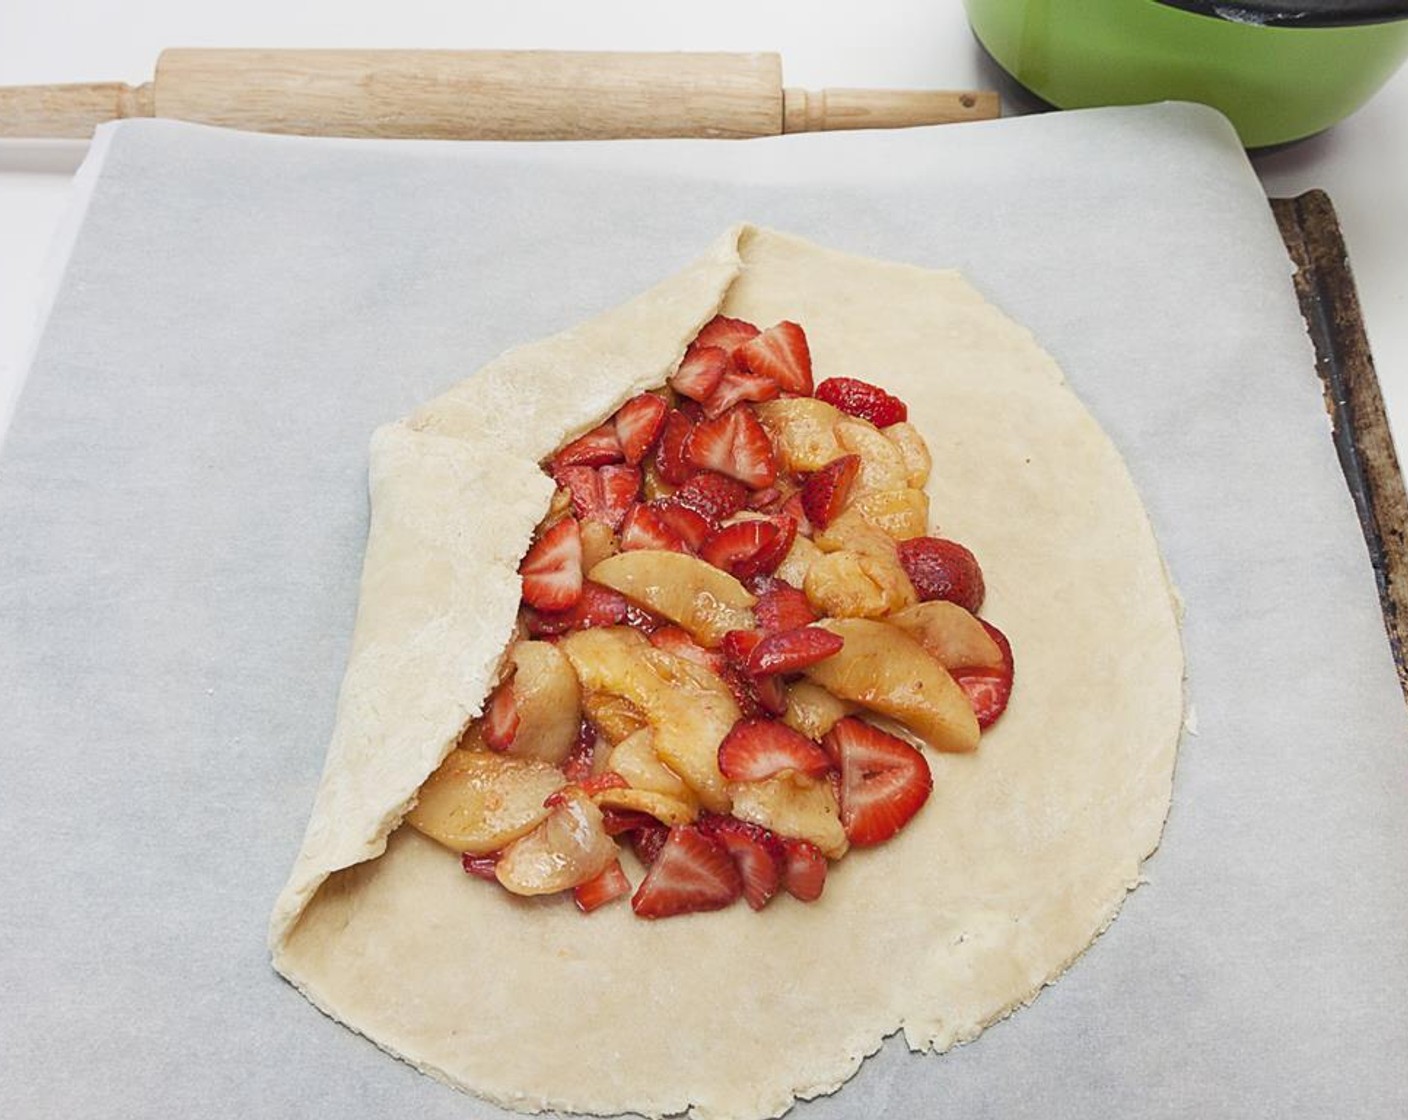 step 6 Line a pan with baking sheet. Roll dough into a 12 inch circle. Place circle on the sheet and spoon the fruit into the center of the dough leaving a 2 to 3 inch border. Gently fold the edges over the fruit, overlapping if necessary. Now pour all but 2 tbsp of juice on the fruit.